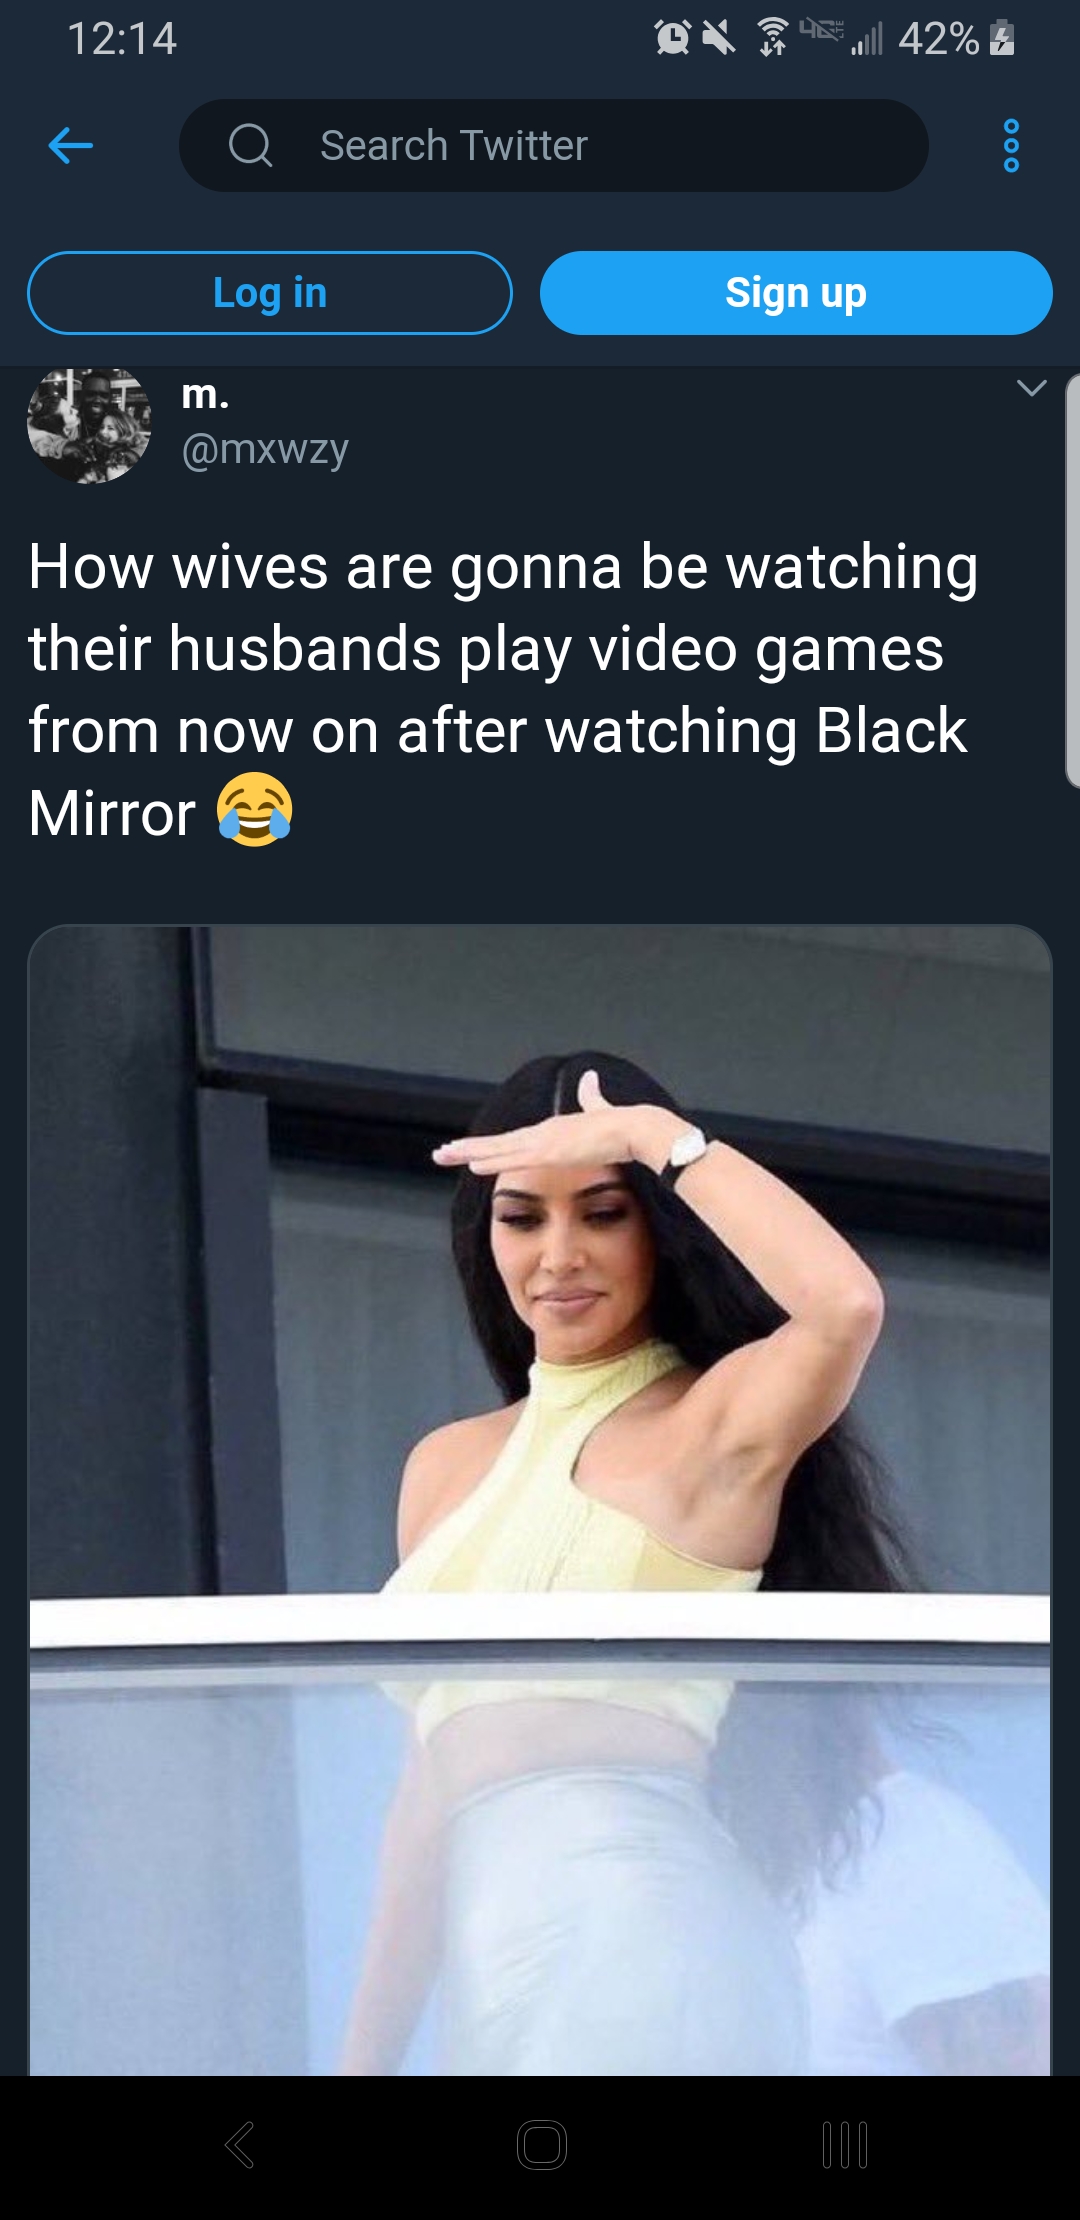 black mirror season 5 memes - video - Xx. 42% & Search Twitter Log in Sign up m. 5 Way How wives are gonna be watching their husbands play video games from now on after watching Black Mirror